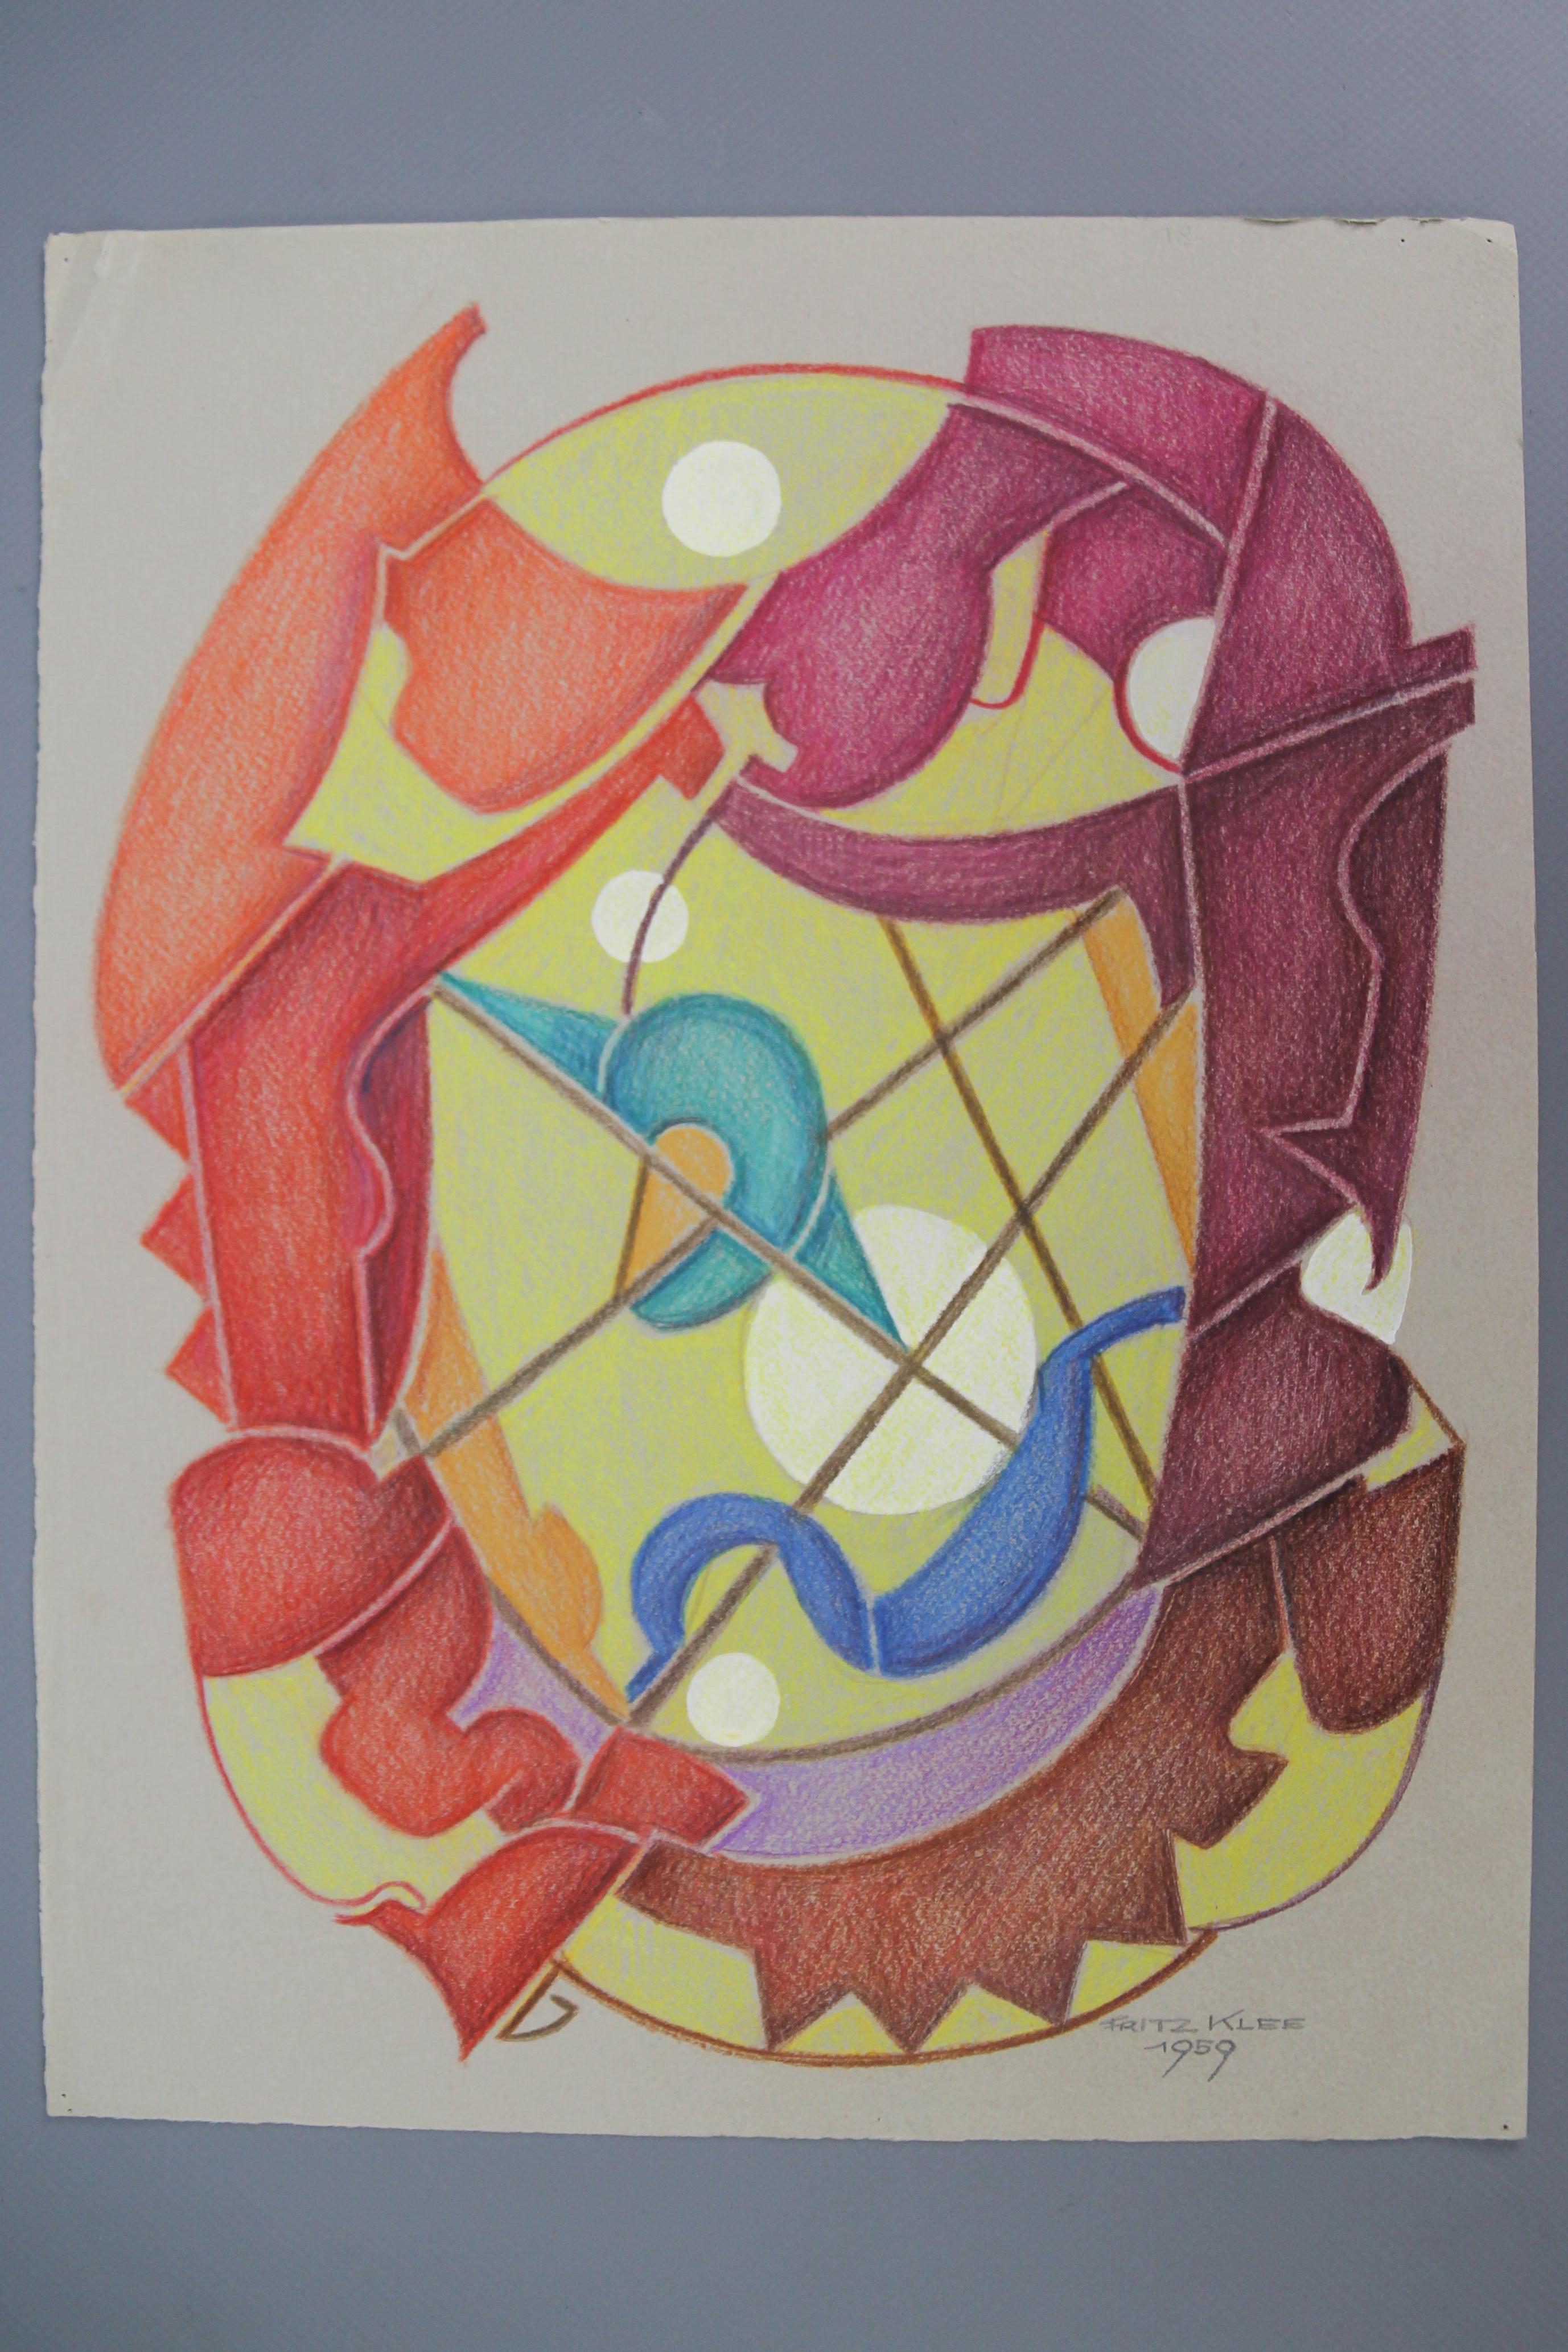 A magnificent abstract organic hand-drawing, a draft of an ornamental composition in strong, bright colors by Fritz Klee. Colored pencils on paper, signed and dated 'Fritz Klee 1959',
Sheet size: 31 x 25 cm / 12.2 in x 9.84 in
Professor Fritz Klee